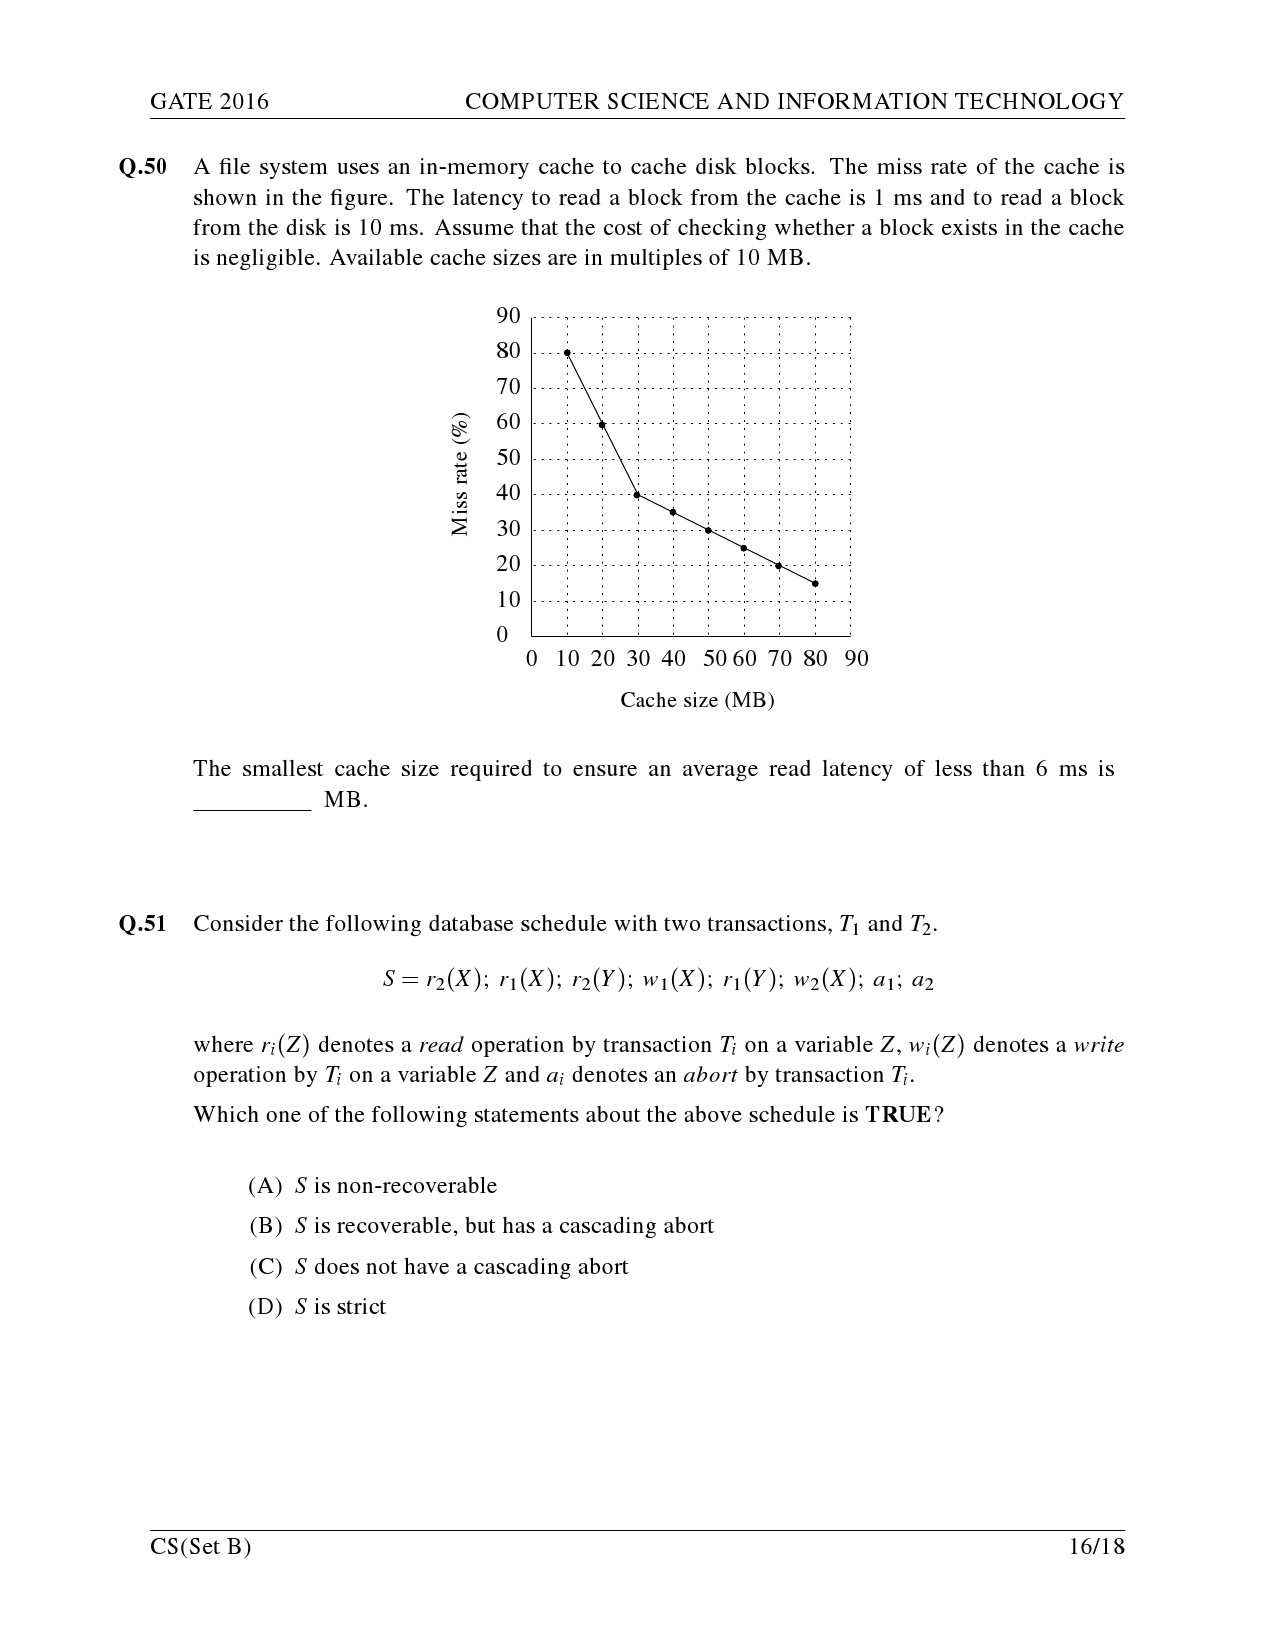 GATE Exam Question Paper 2016 Computer Science and Information Technology Set B 19